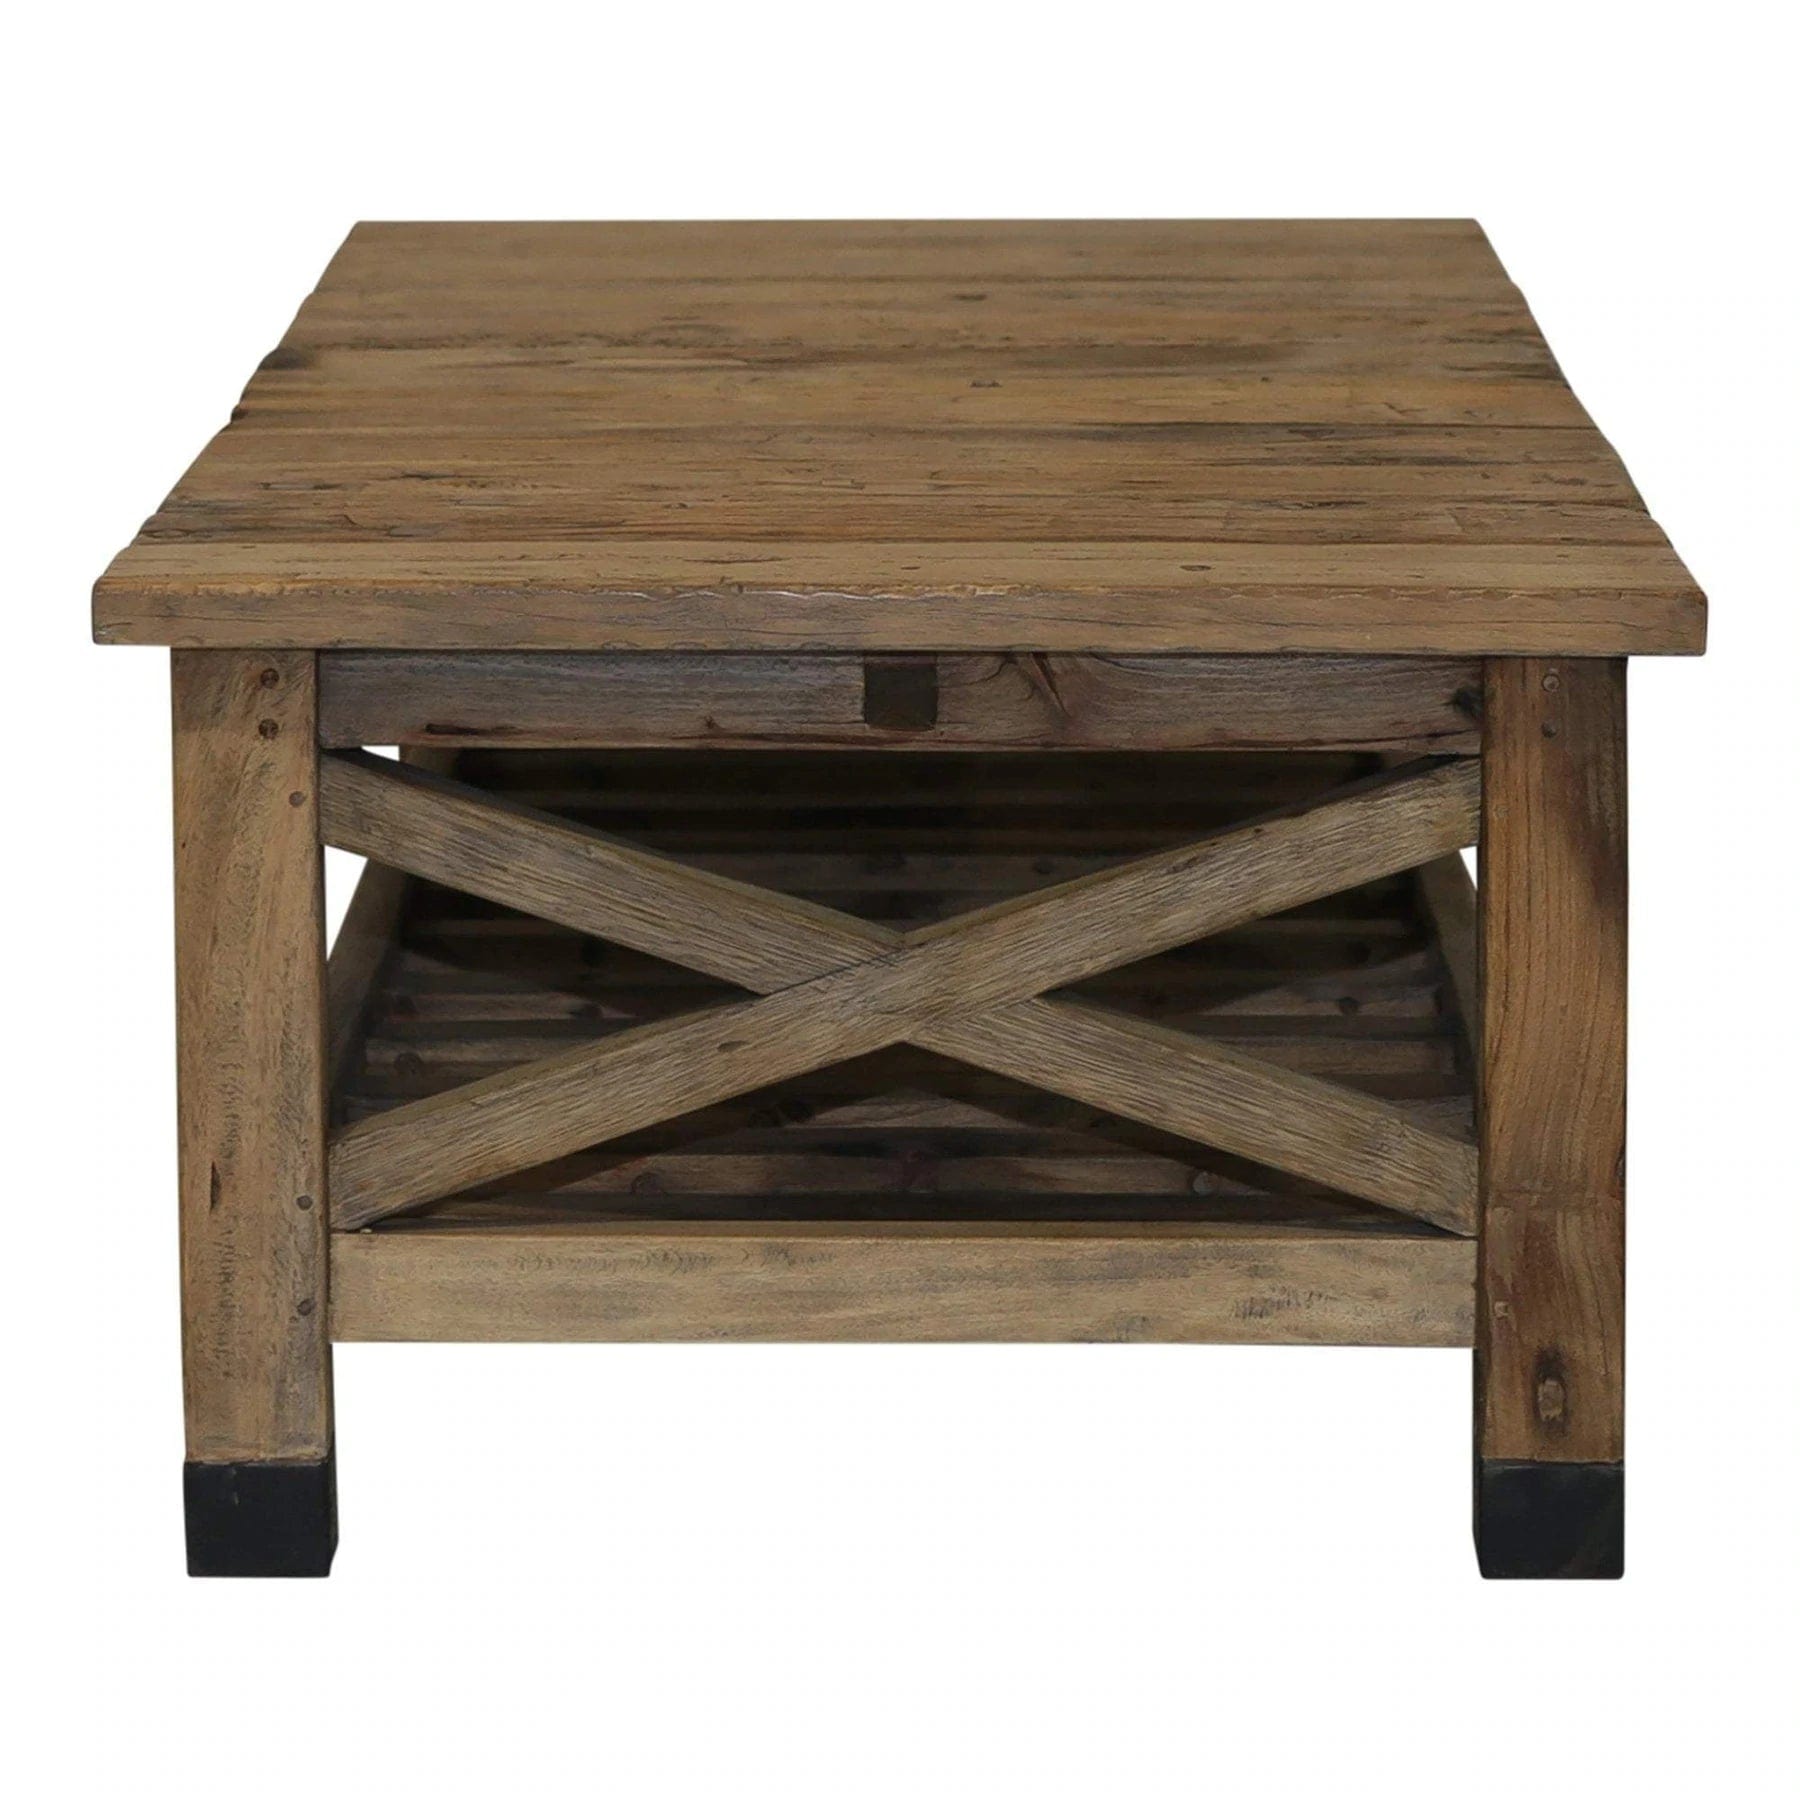 ABNER WOOD COFFEE TABLE